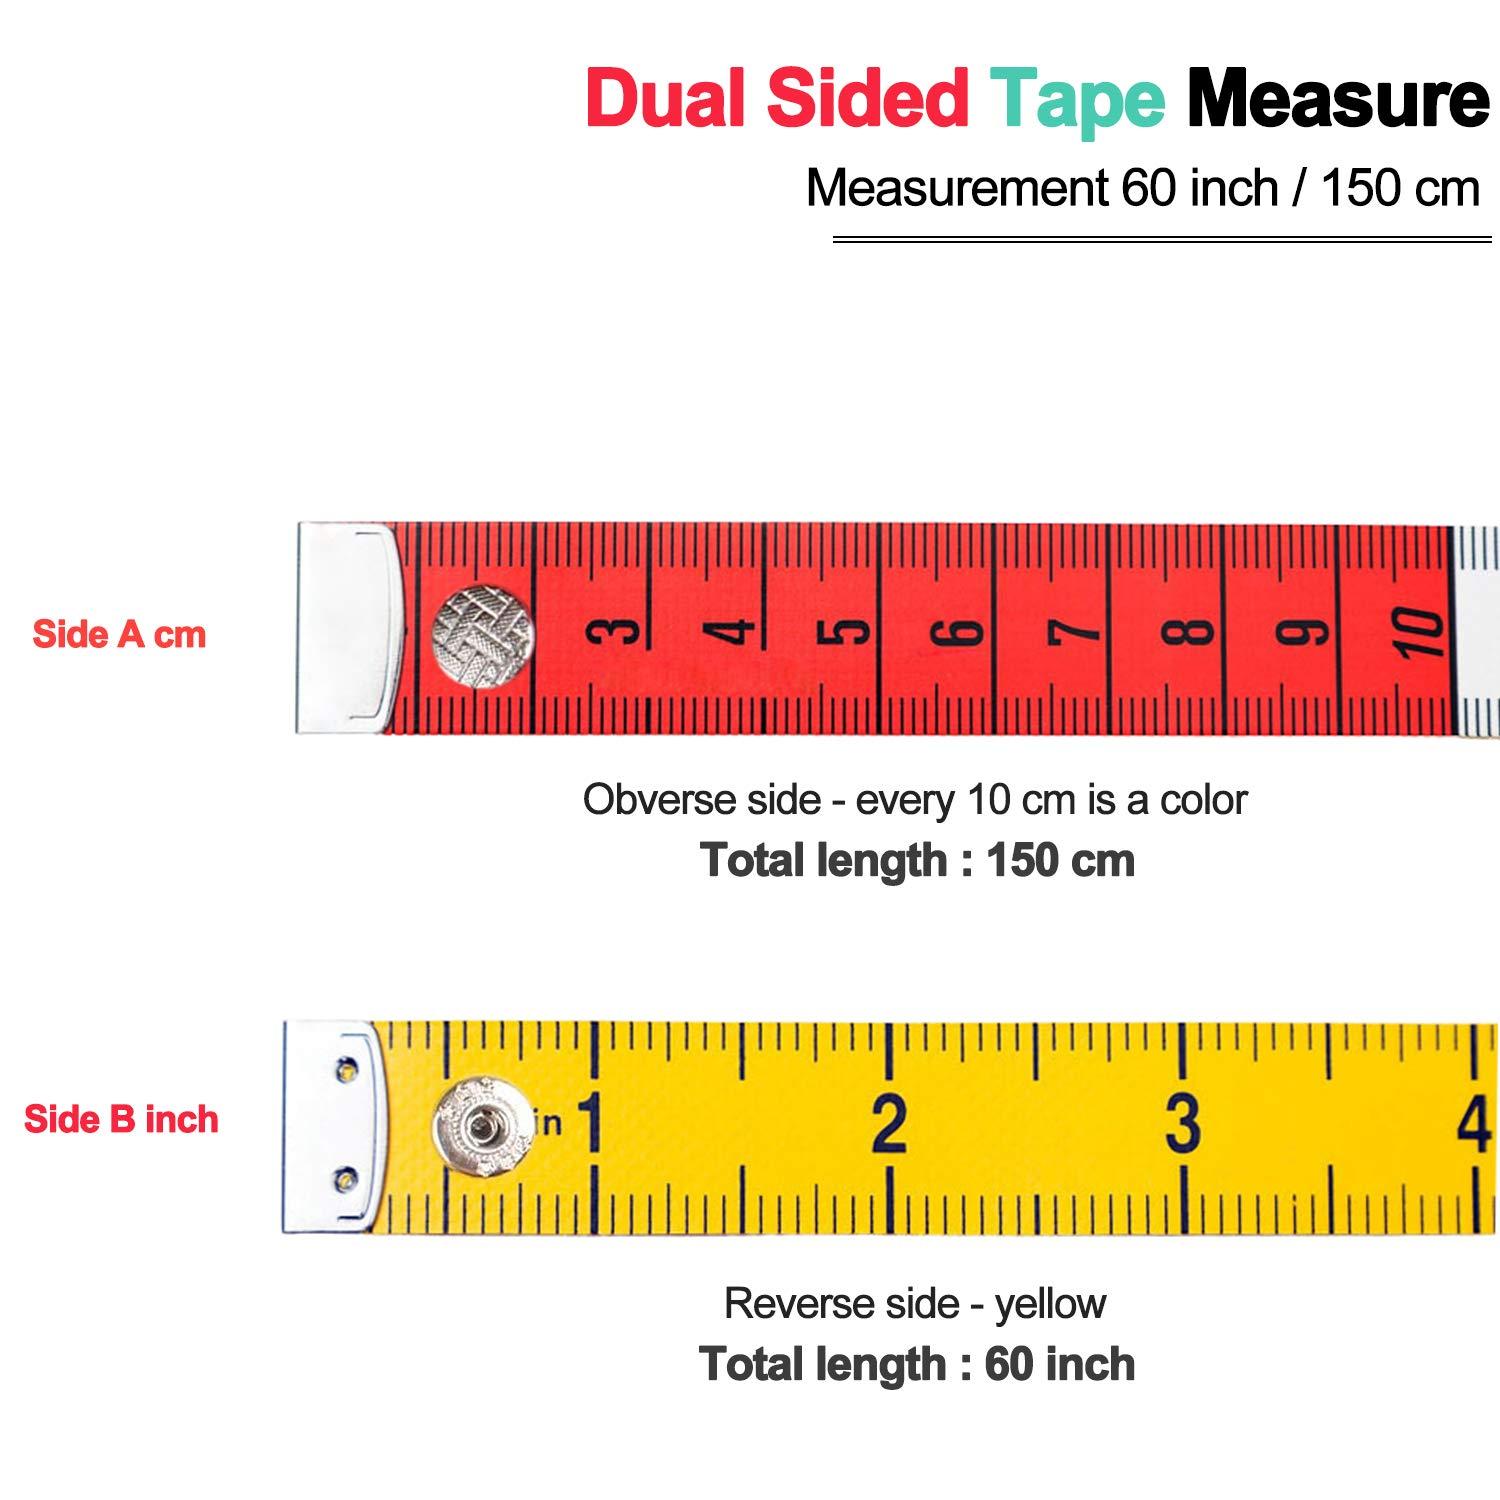 SKY-TOUCH Tape Measure for Body Fabric Sewing Tailor Cloth Knitting Home  Craft Measurements, 150-cm Soft Multicolor Tape Measure Body Measuring Tape  Set with Snap Button Closure, Dual Sided price in UAE